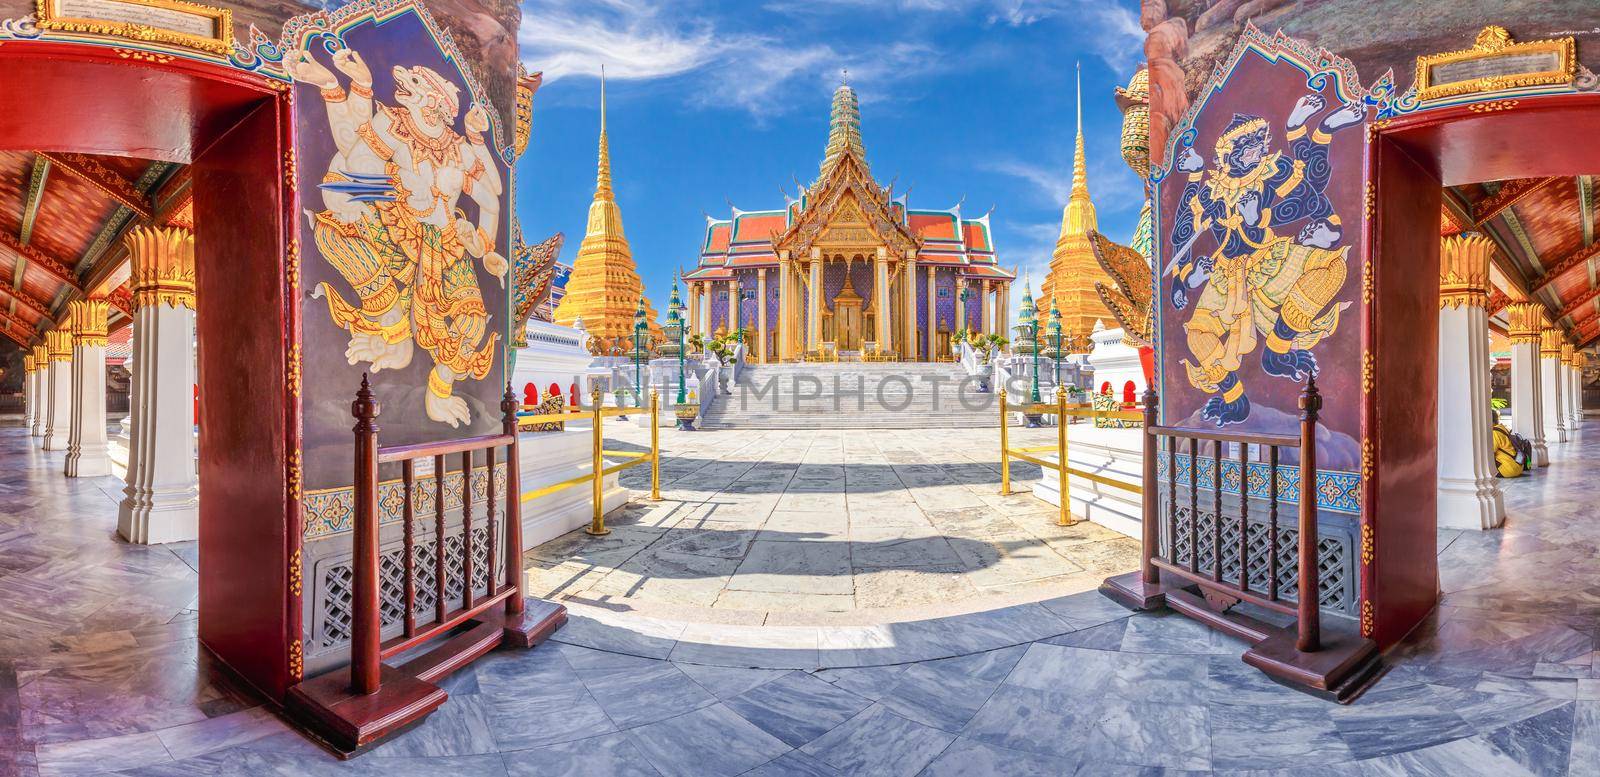 Wat Phra Kaew, Temple of the Emerald Buddha with blue sky, Thailand by Gamjai